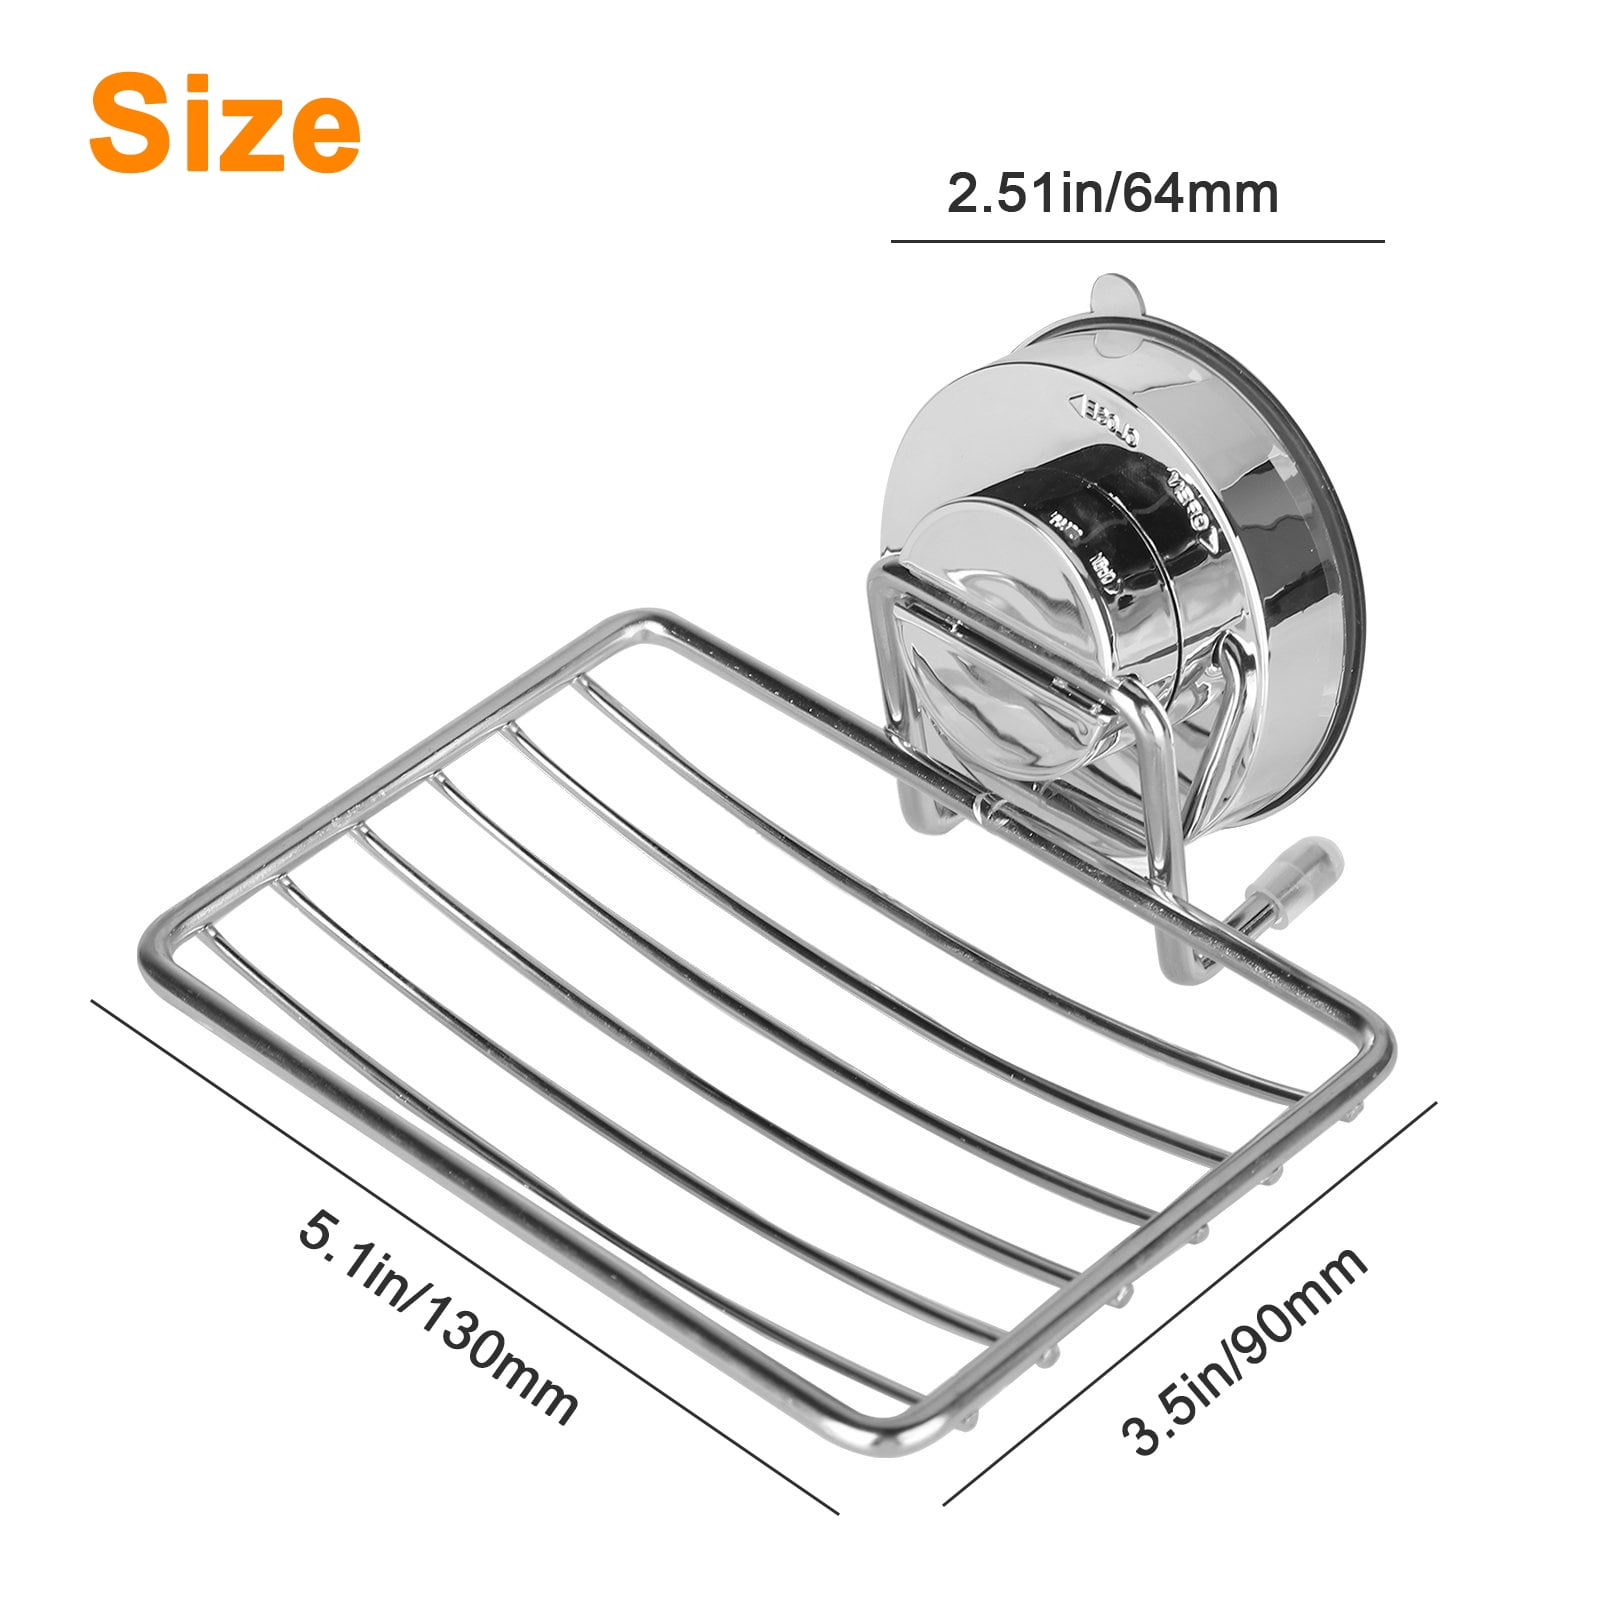 Super Suction Soap Dish Bathroom Stainless Steel Soap Holder Rack Drainer Tray 